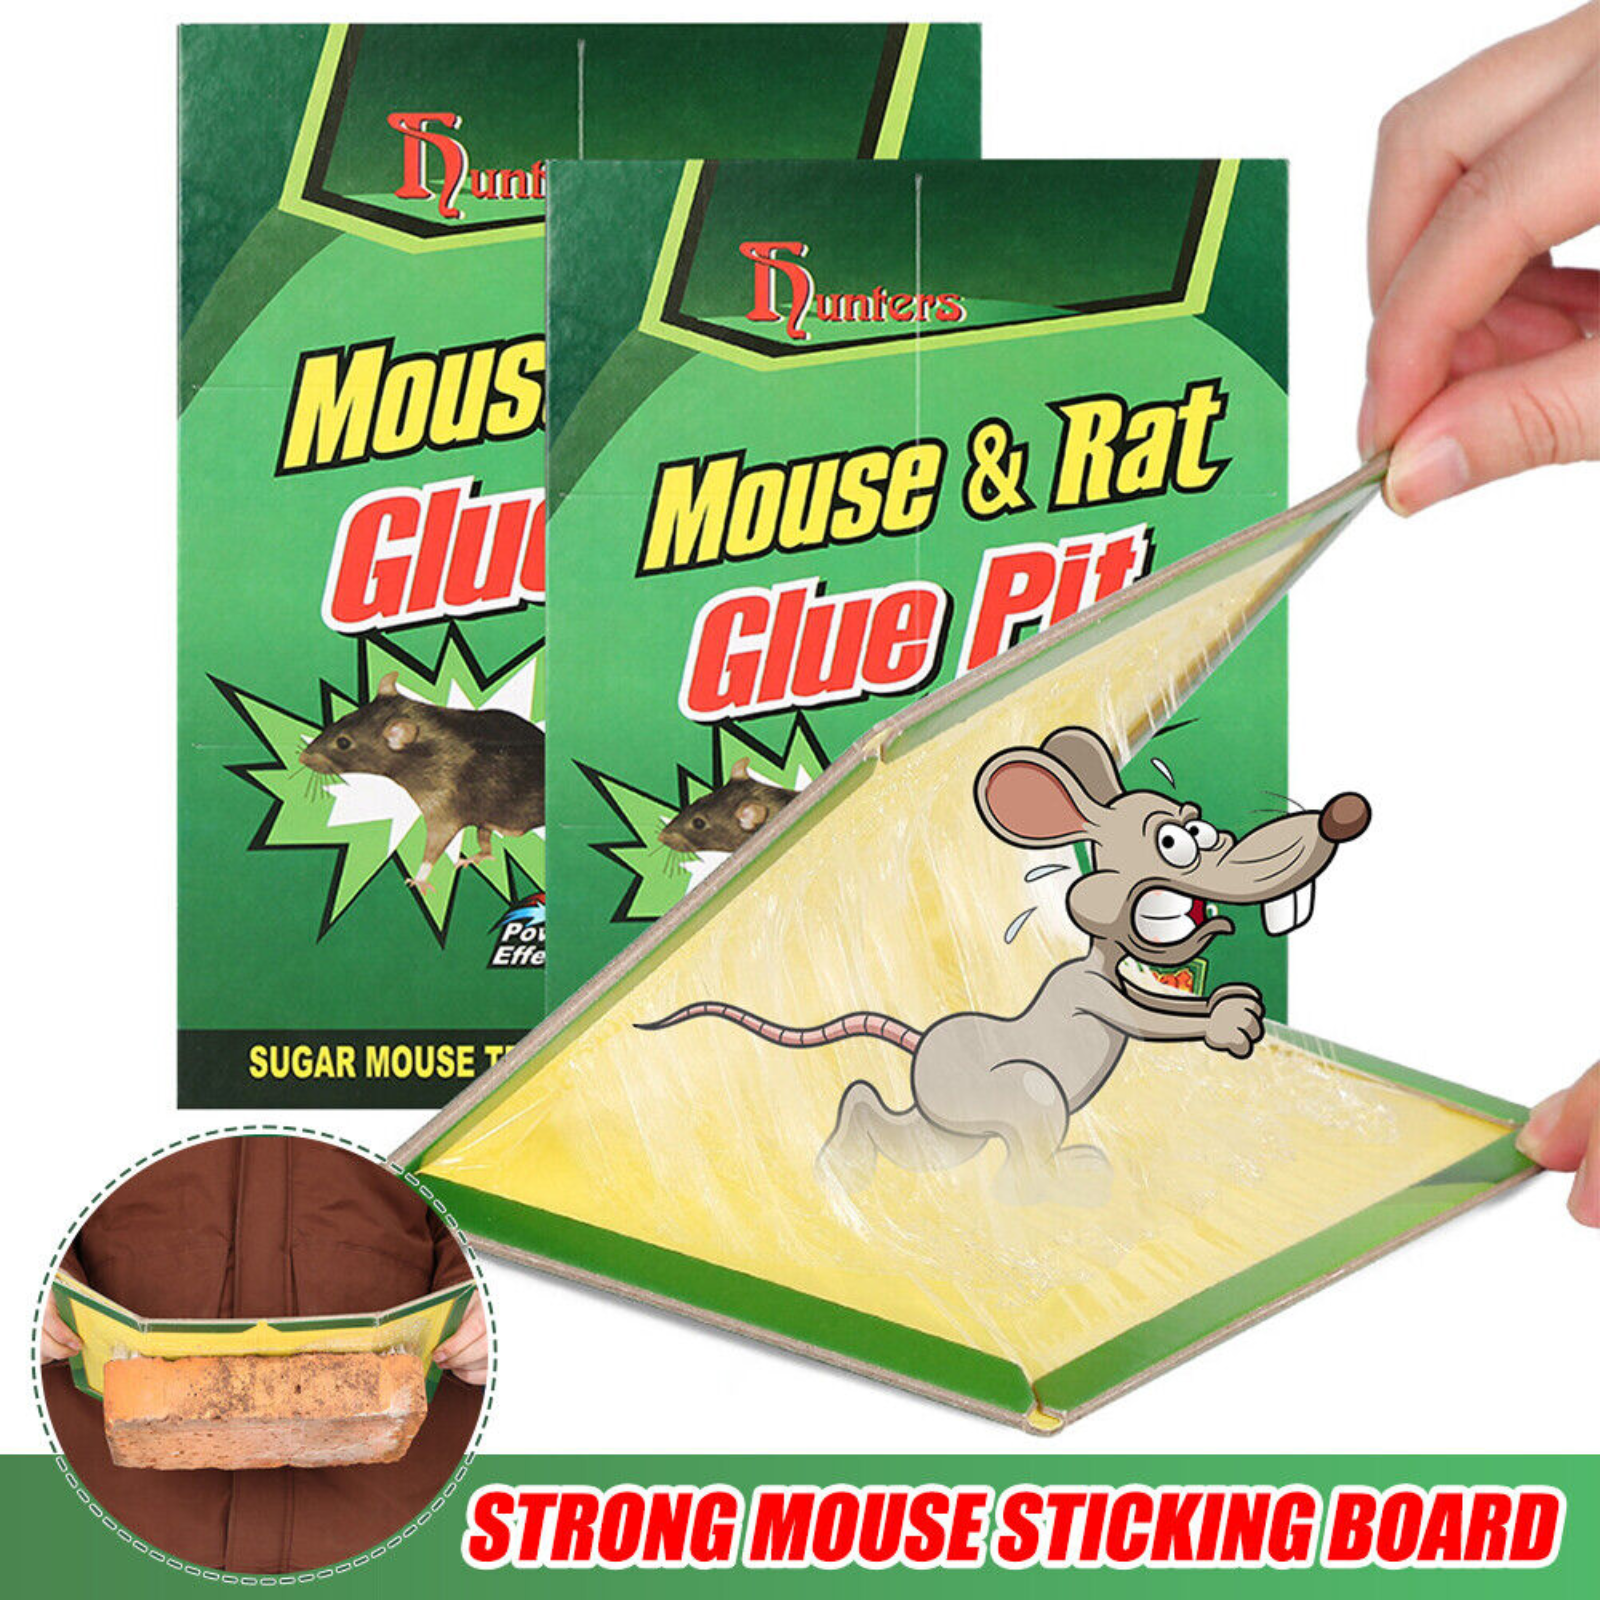 22PC sticky mouse board strong mouse sticker Mouse Trap GlueFfor